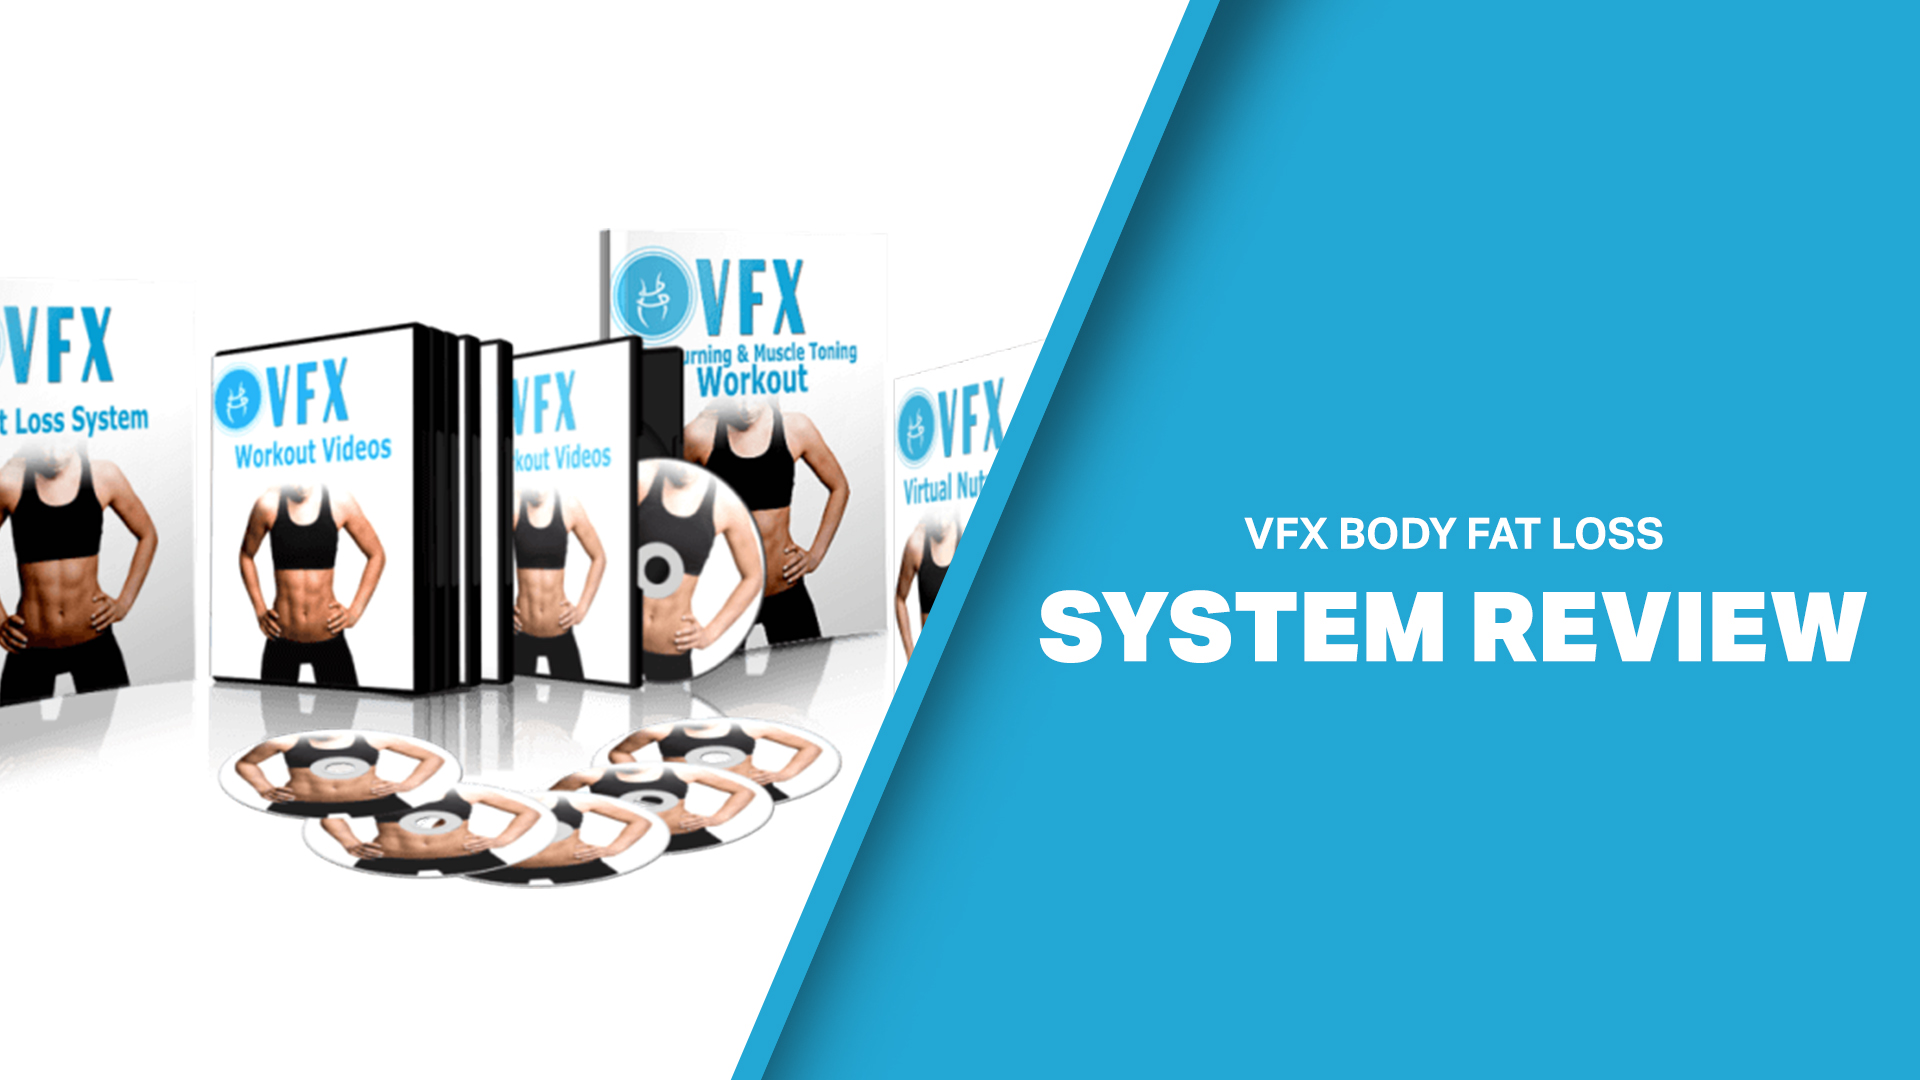 VFX Body Fat Loss System Review